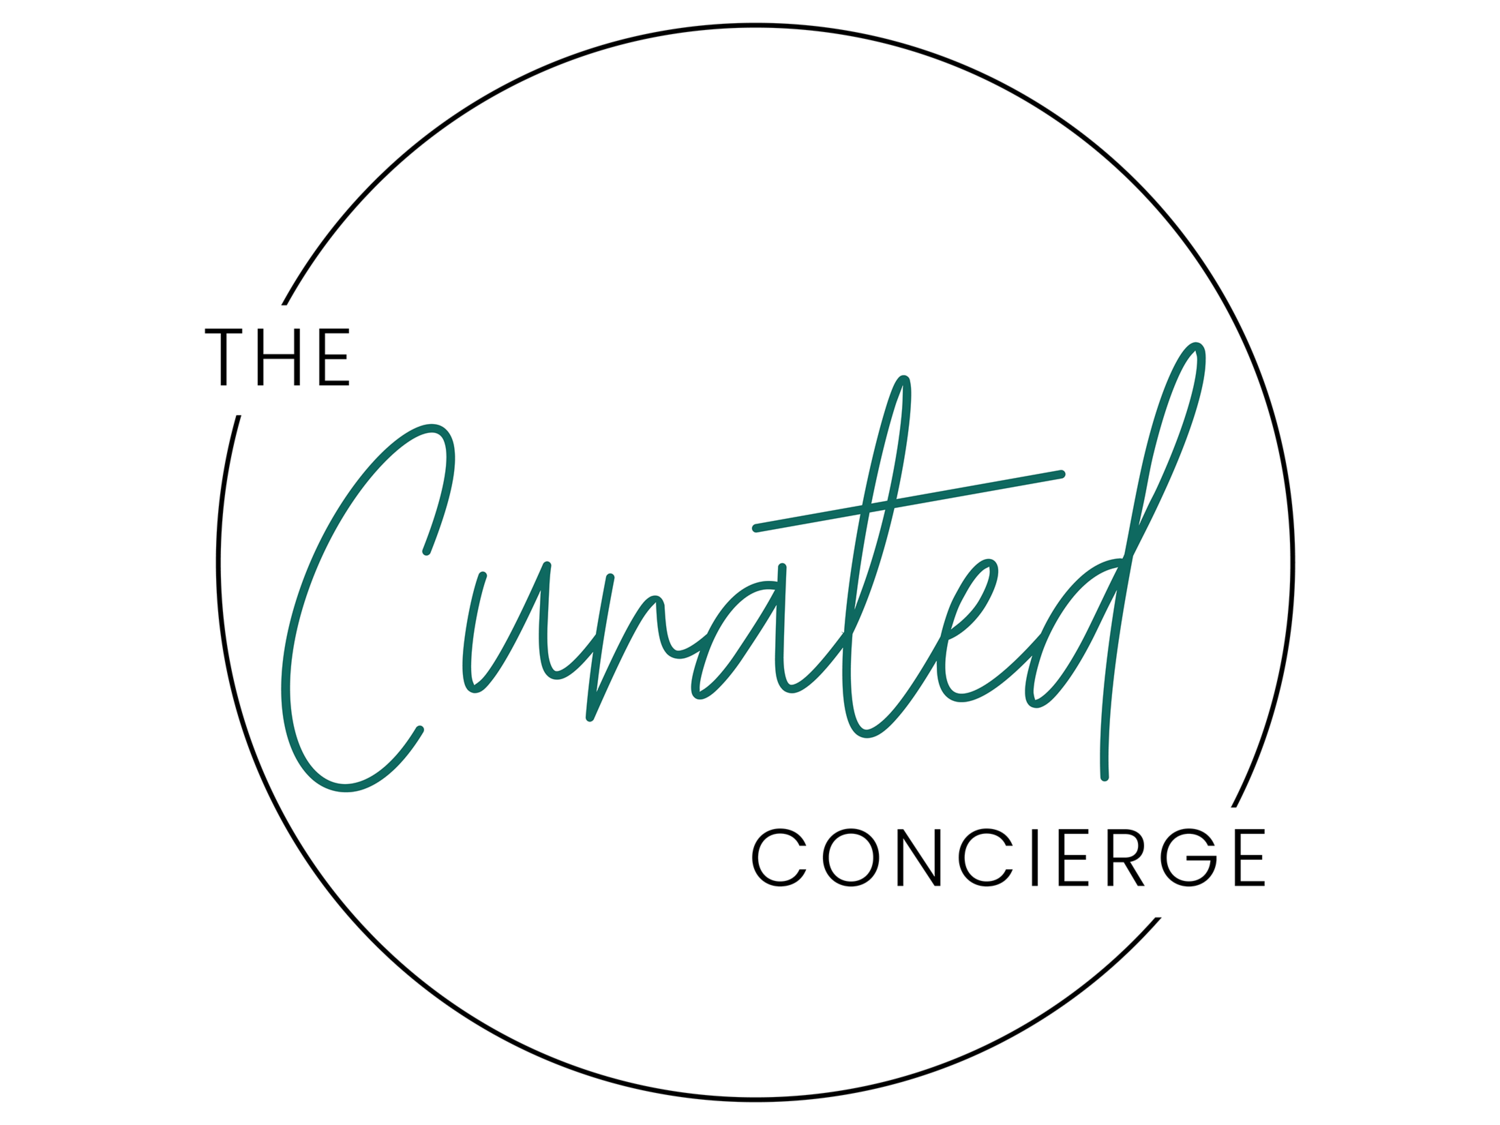 The Curated Concierge